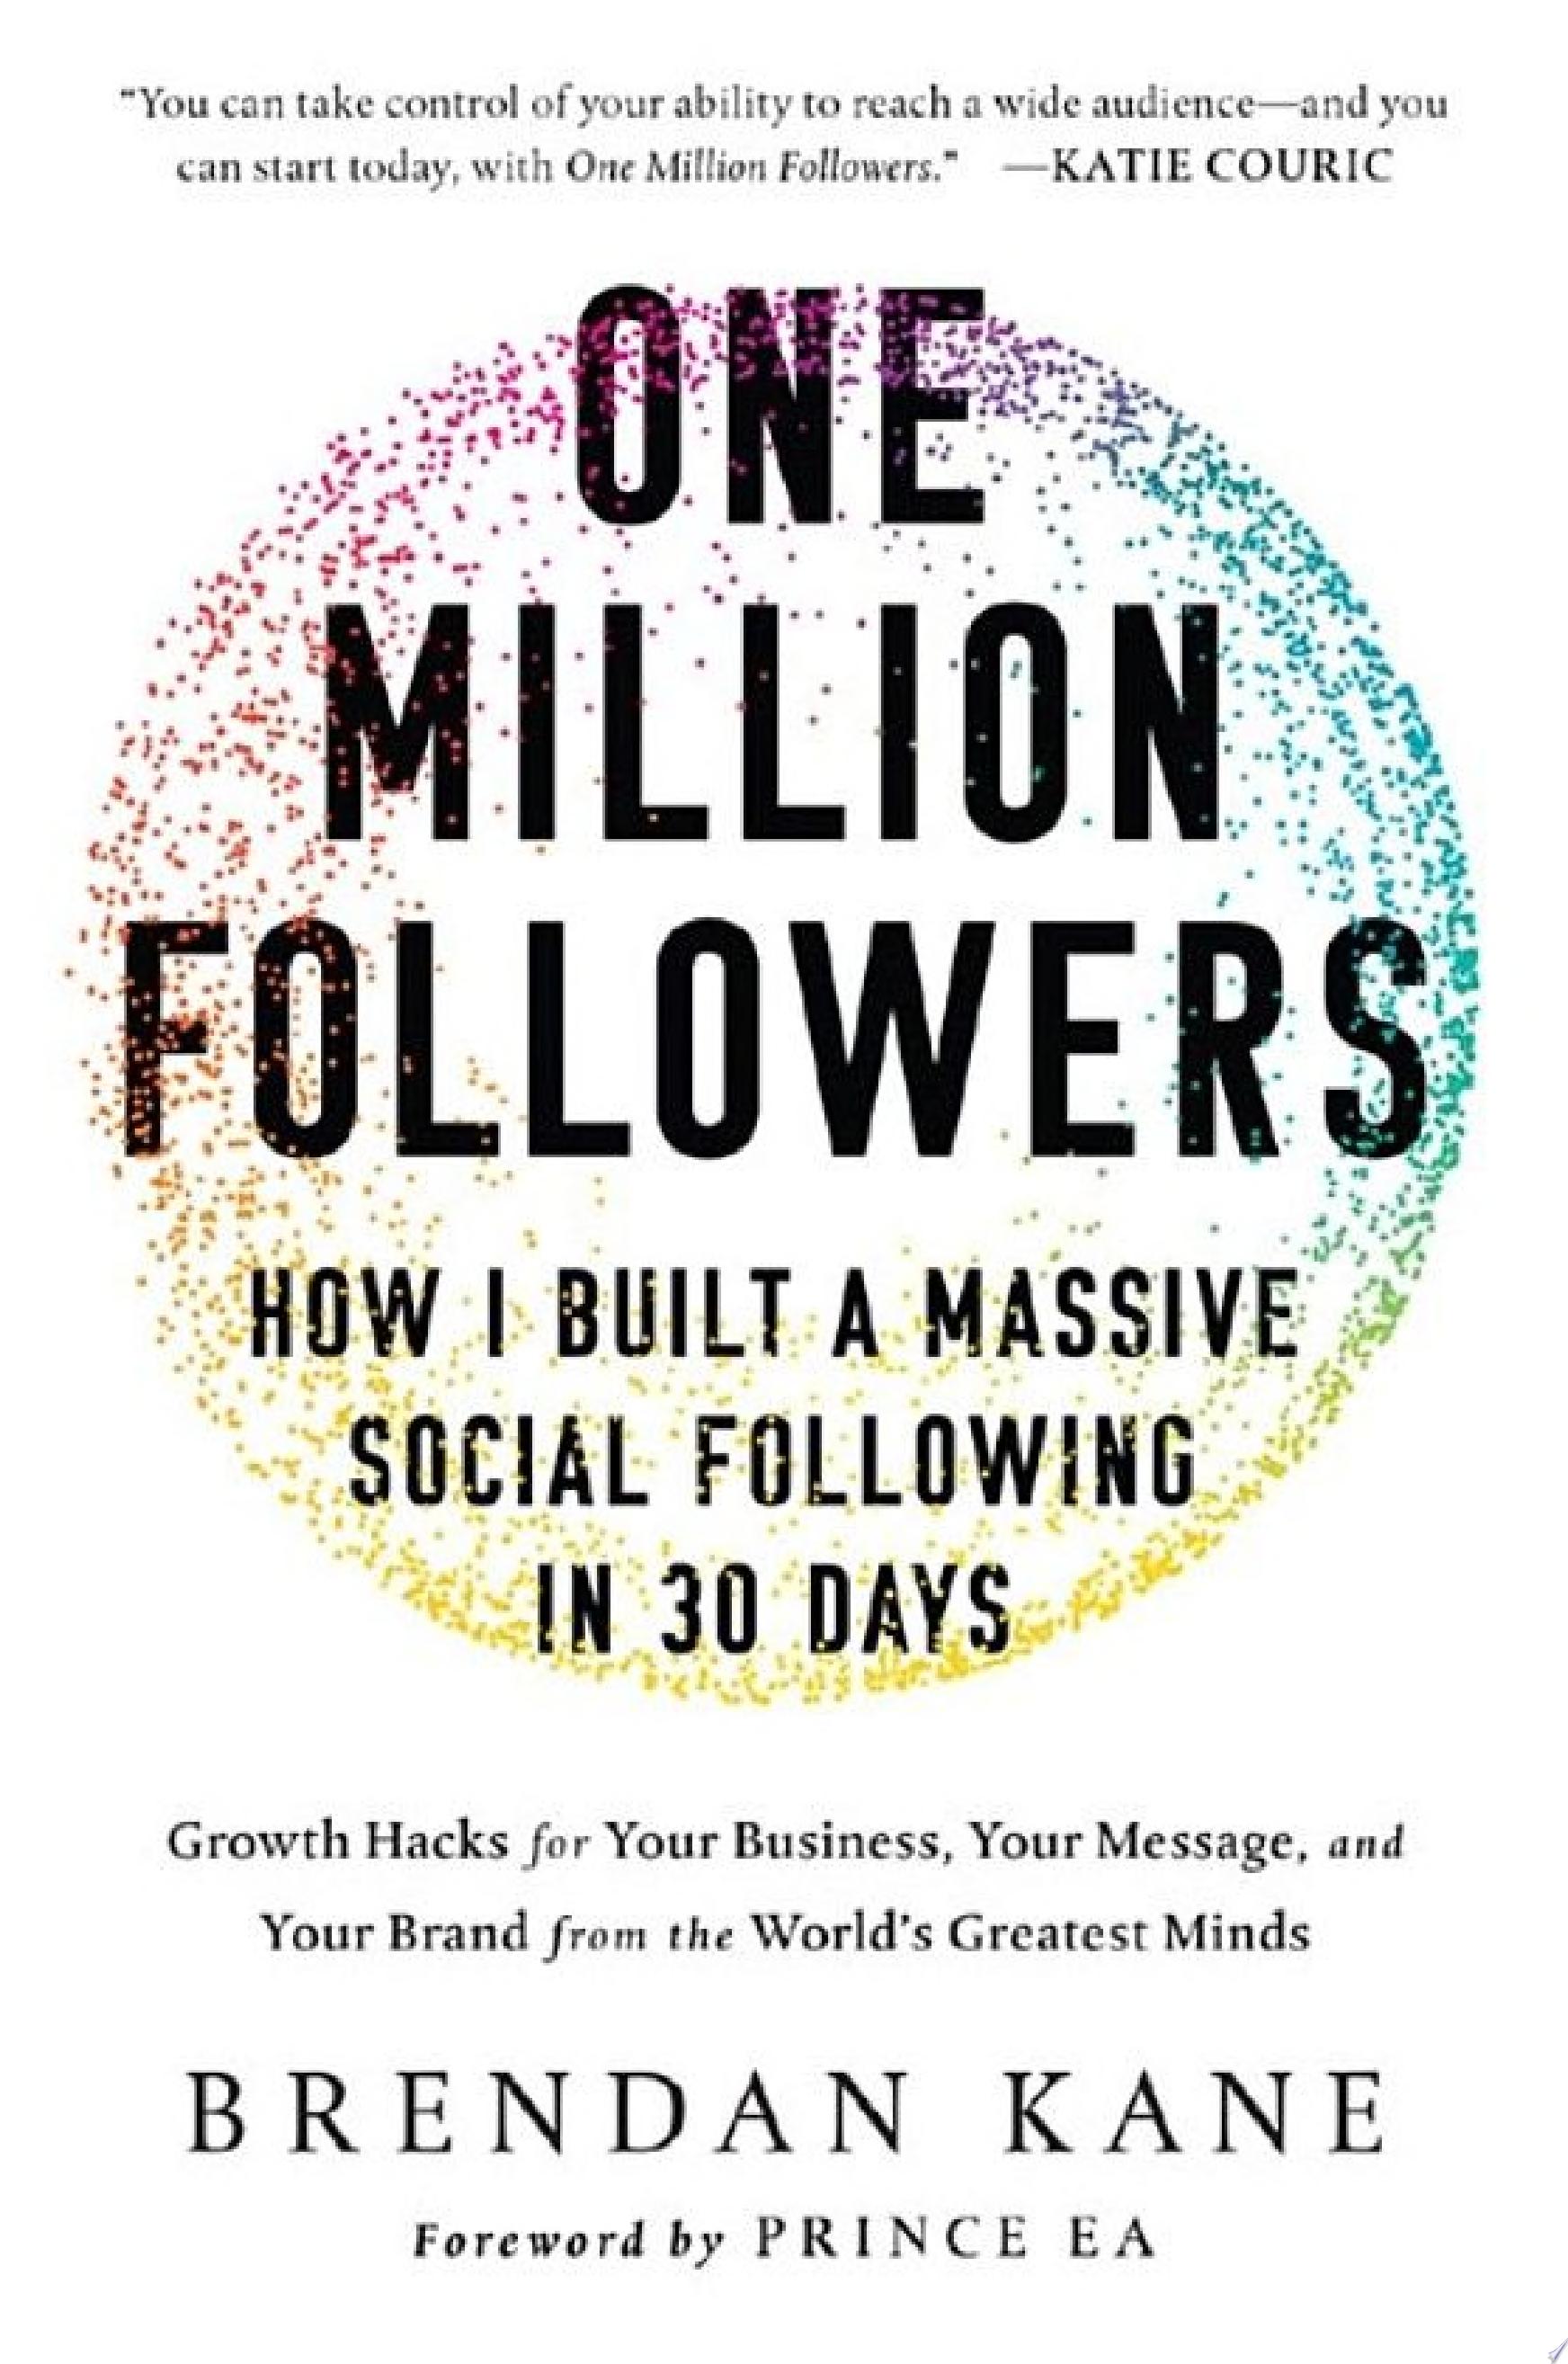 Image for "One Million Followers"